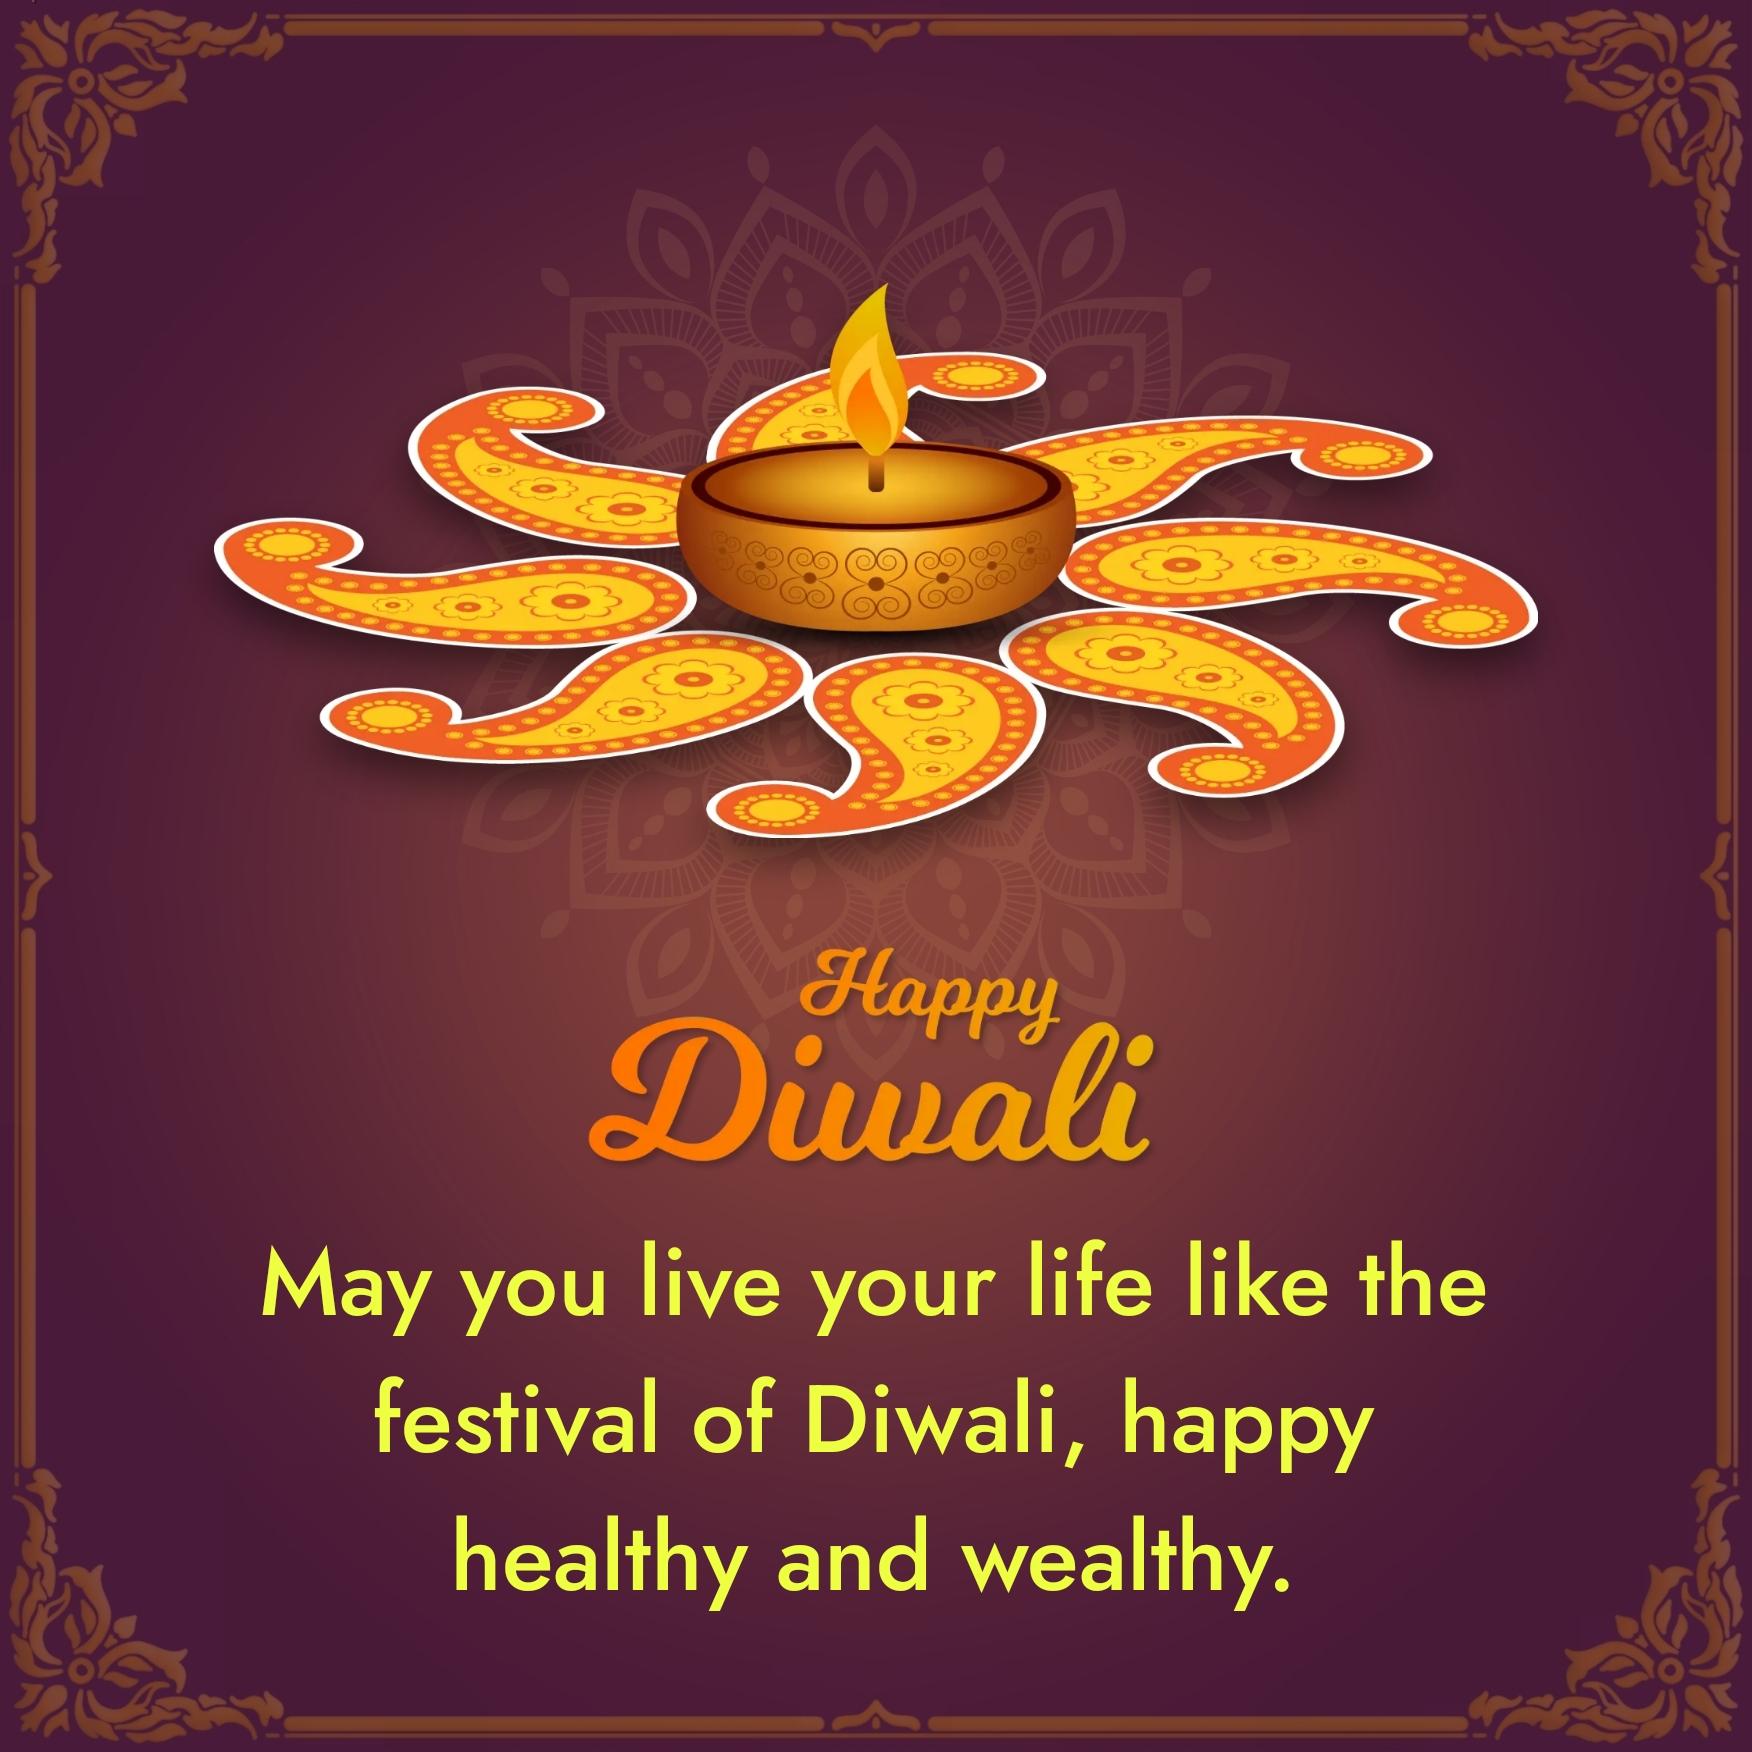 May you live your life like the festival of Diwali